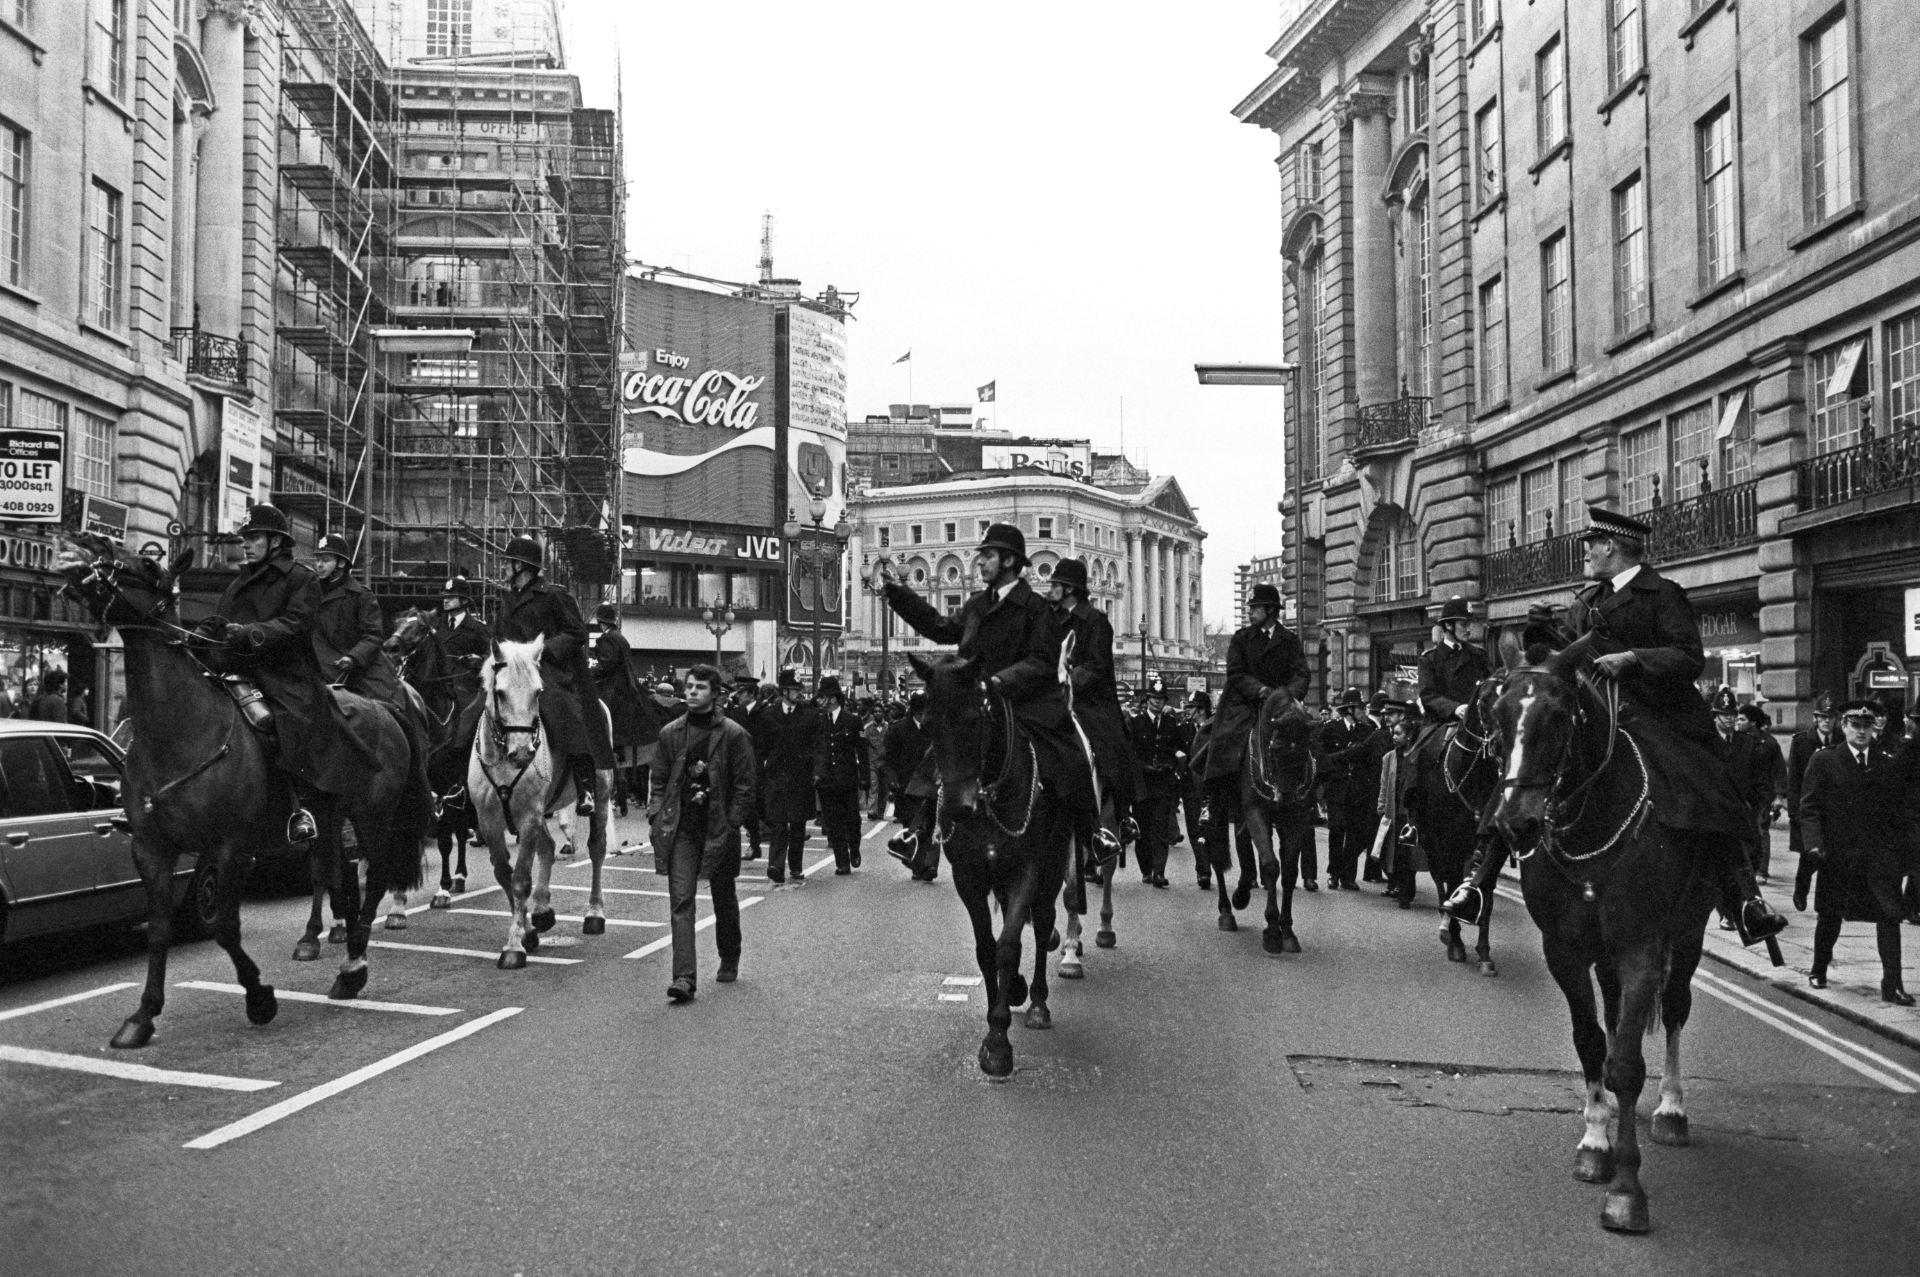 Police on horses in the city centre